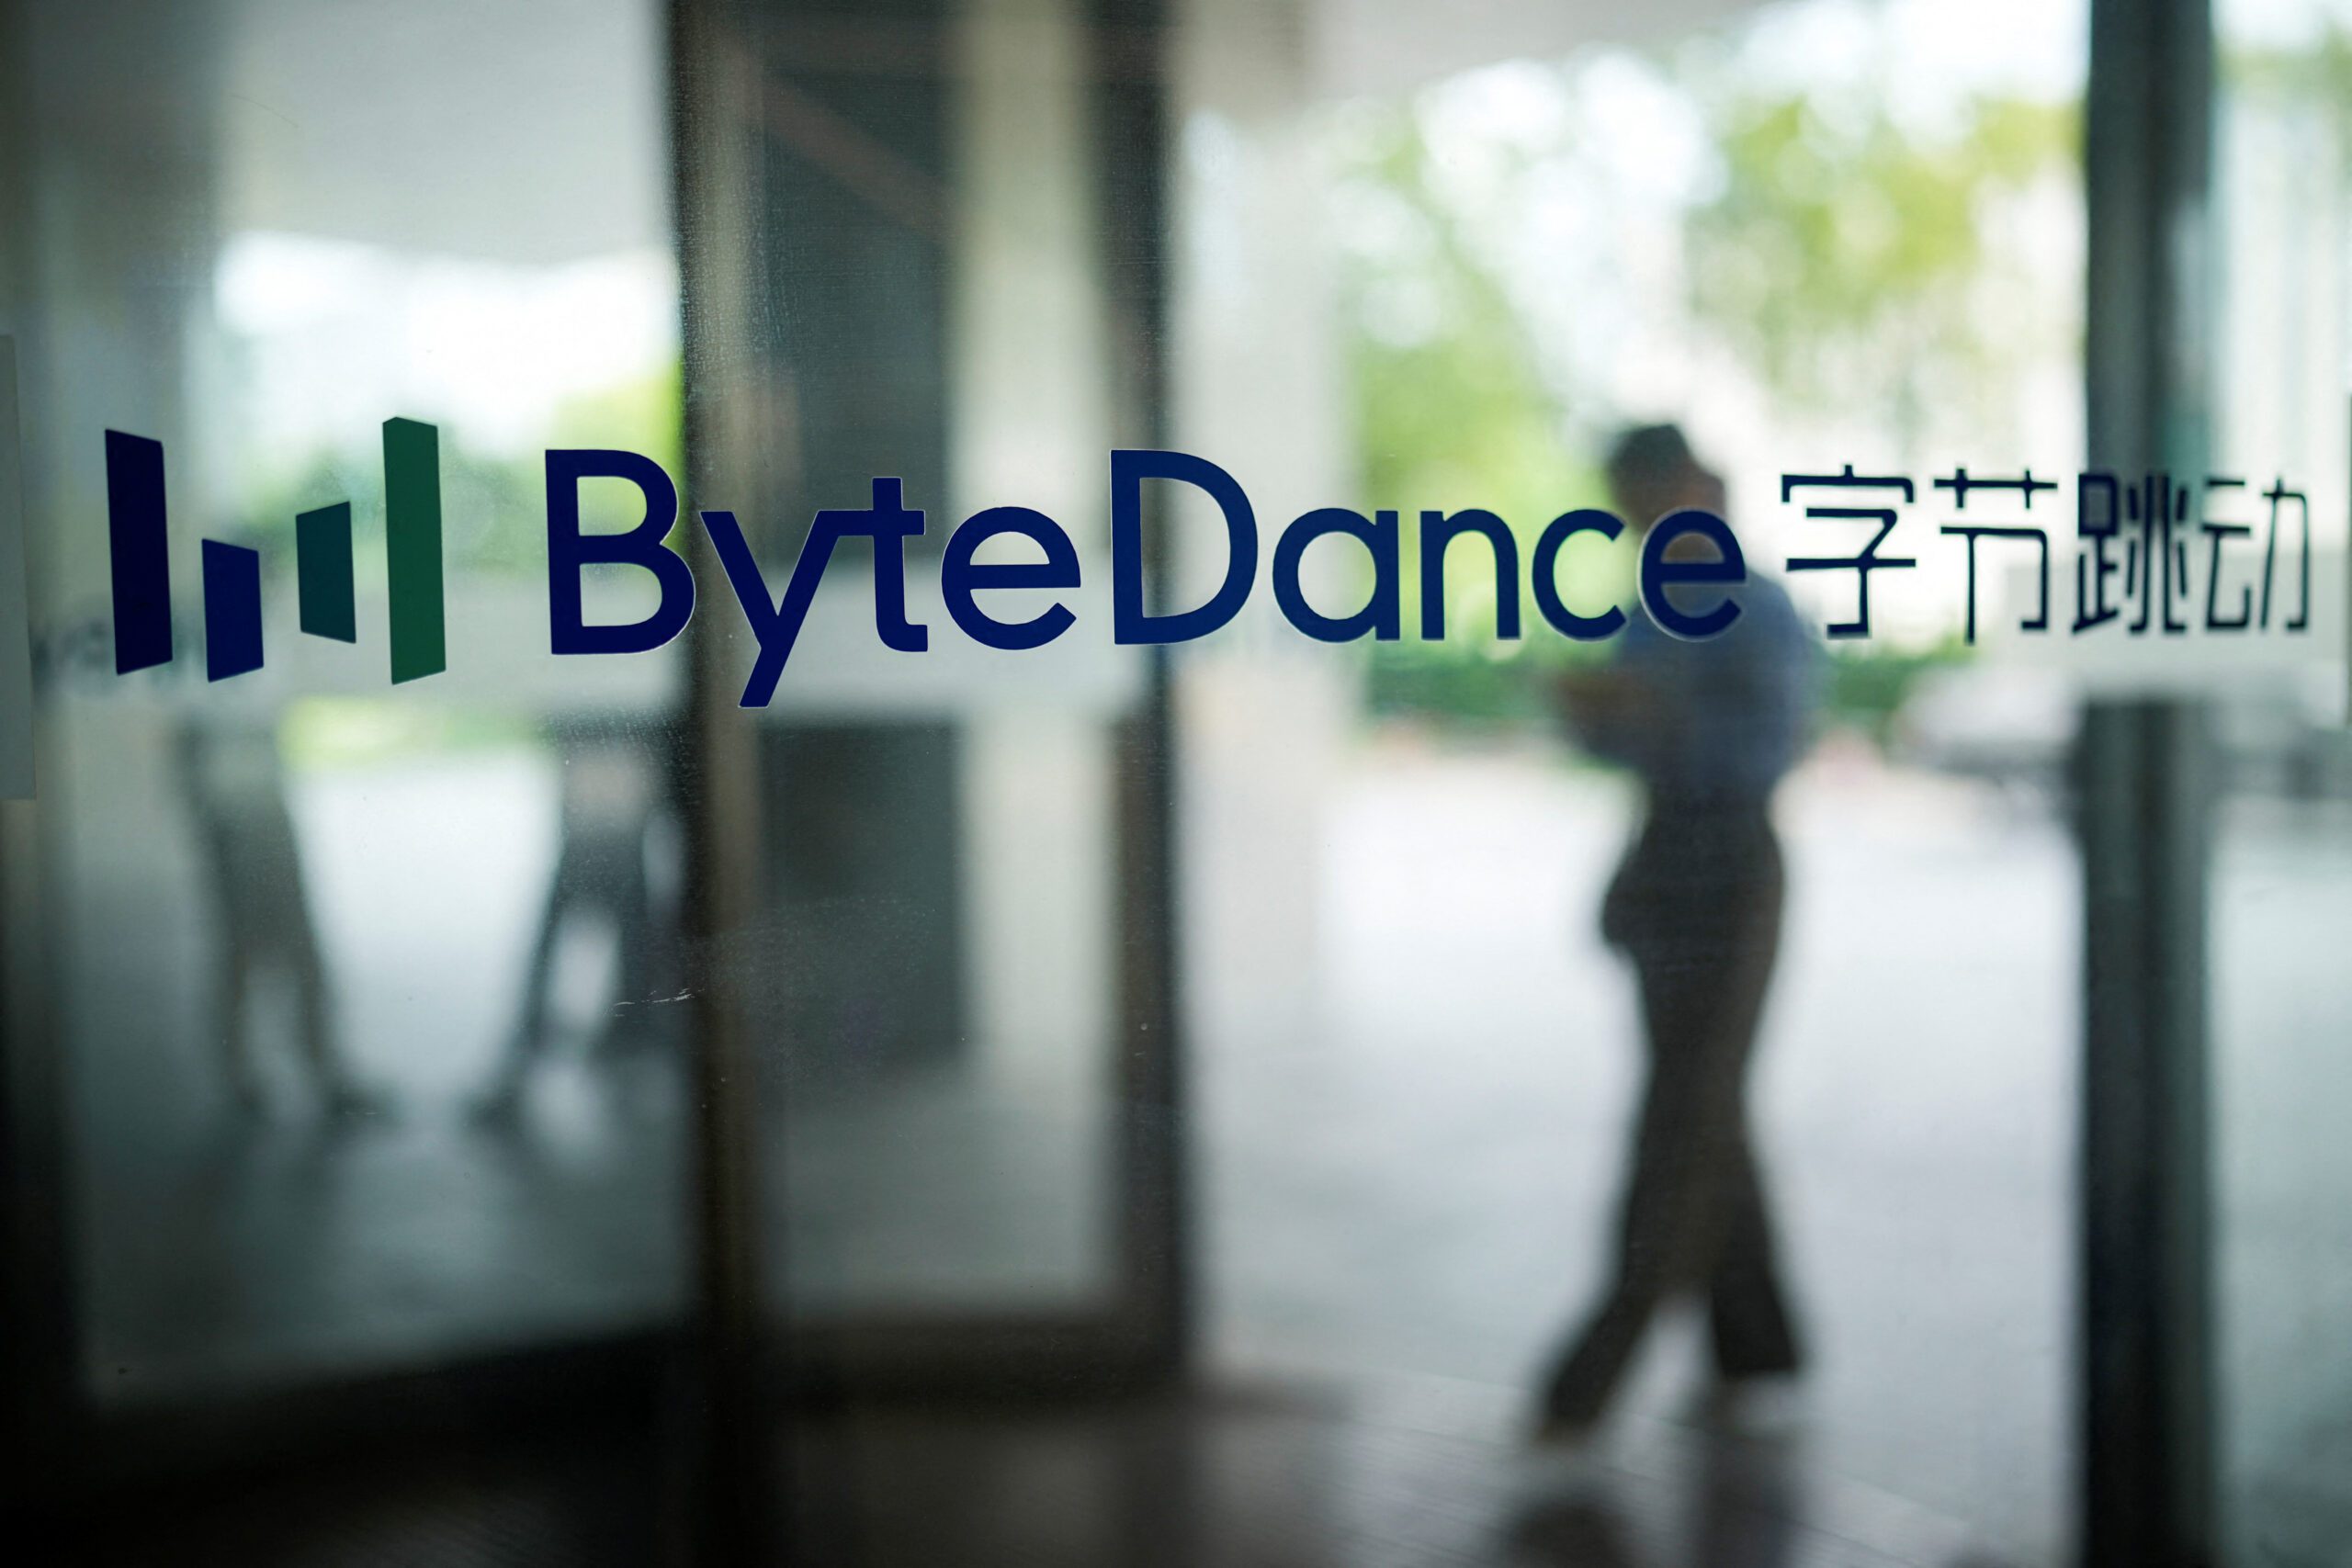 ByteDance denies reports it plans to buy Alibaba's food delivery business